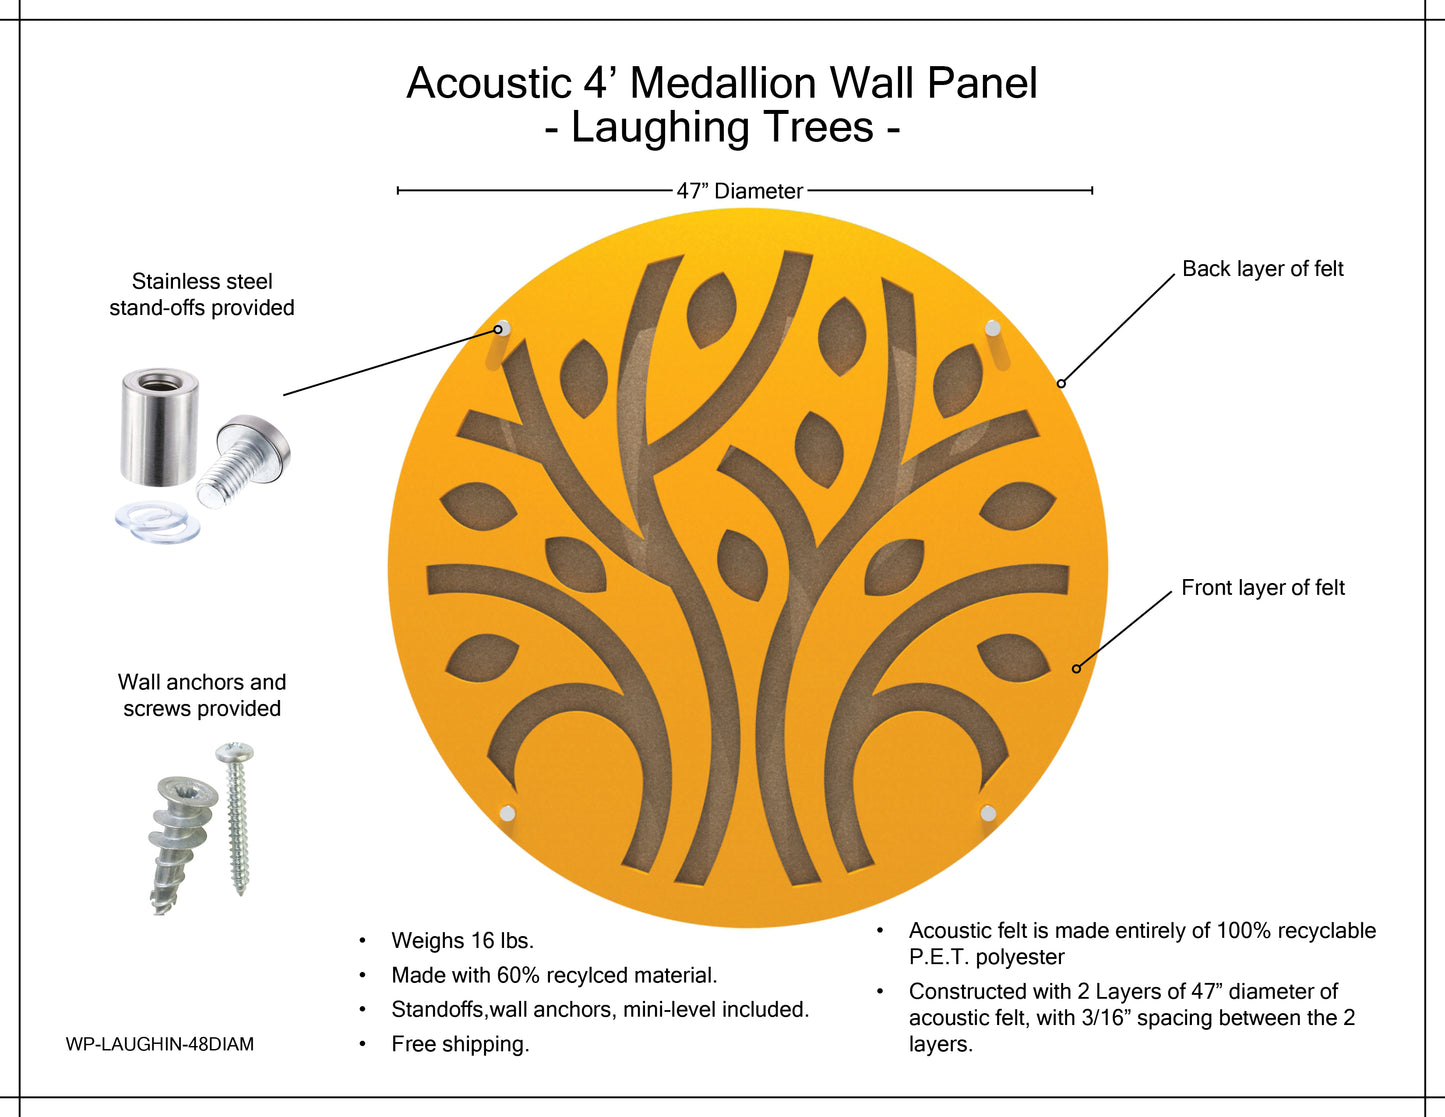 Medallion Acoustic Wall Panel - Laughing Trees